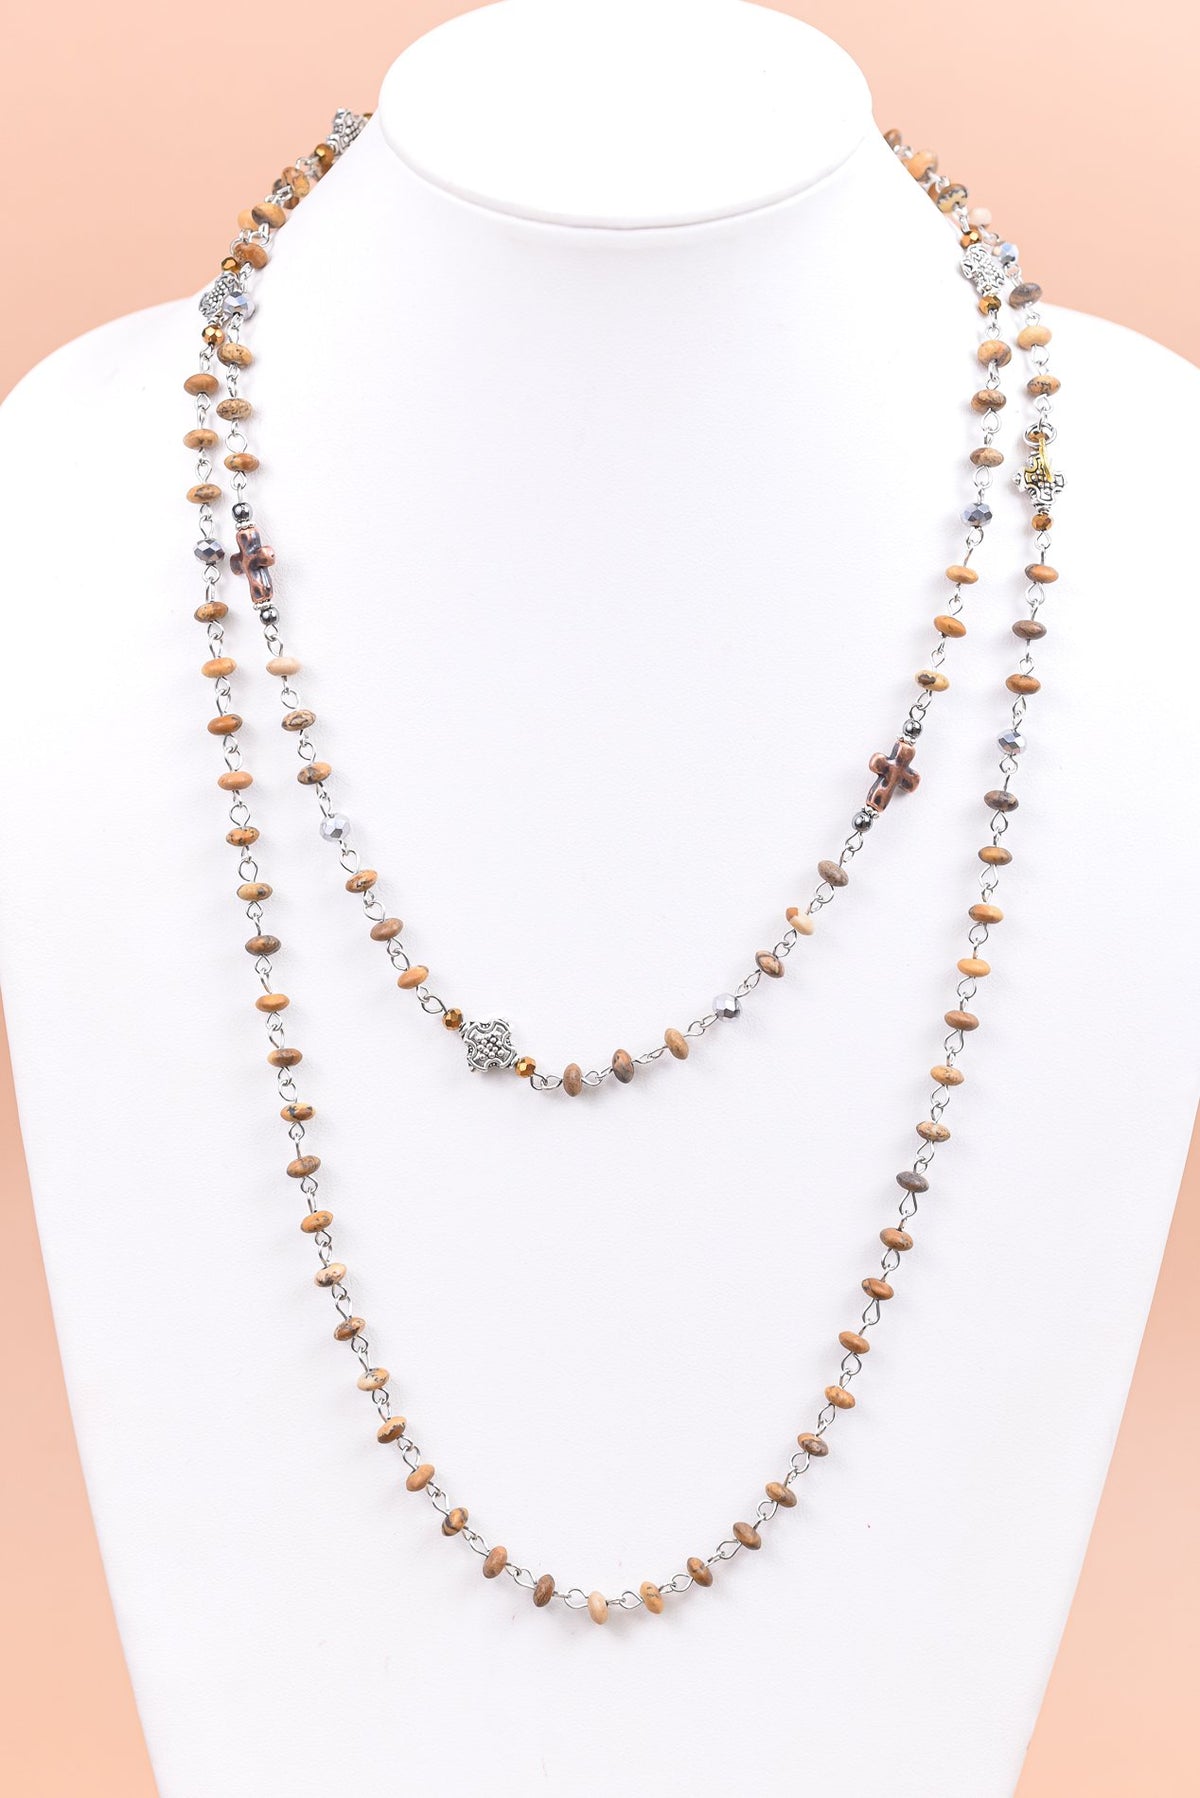 Silver/Brown/Beaded/Cross Charm Long Strand Necklace - NEK3942SI